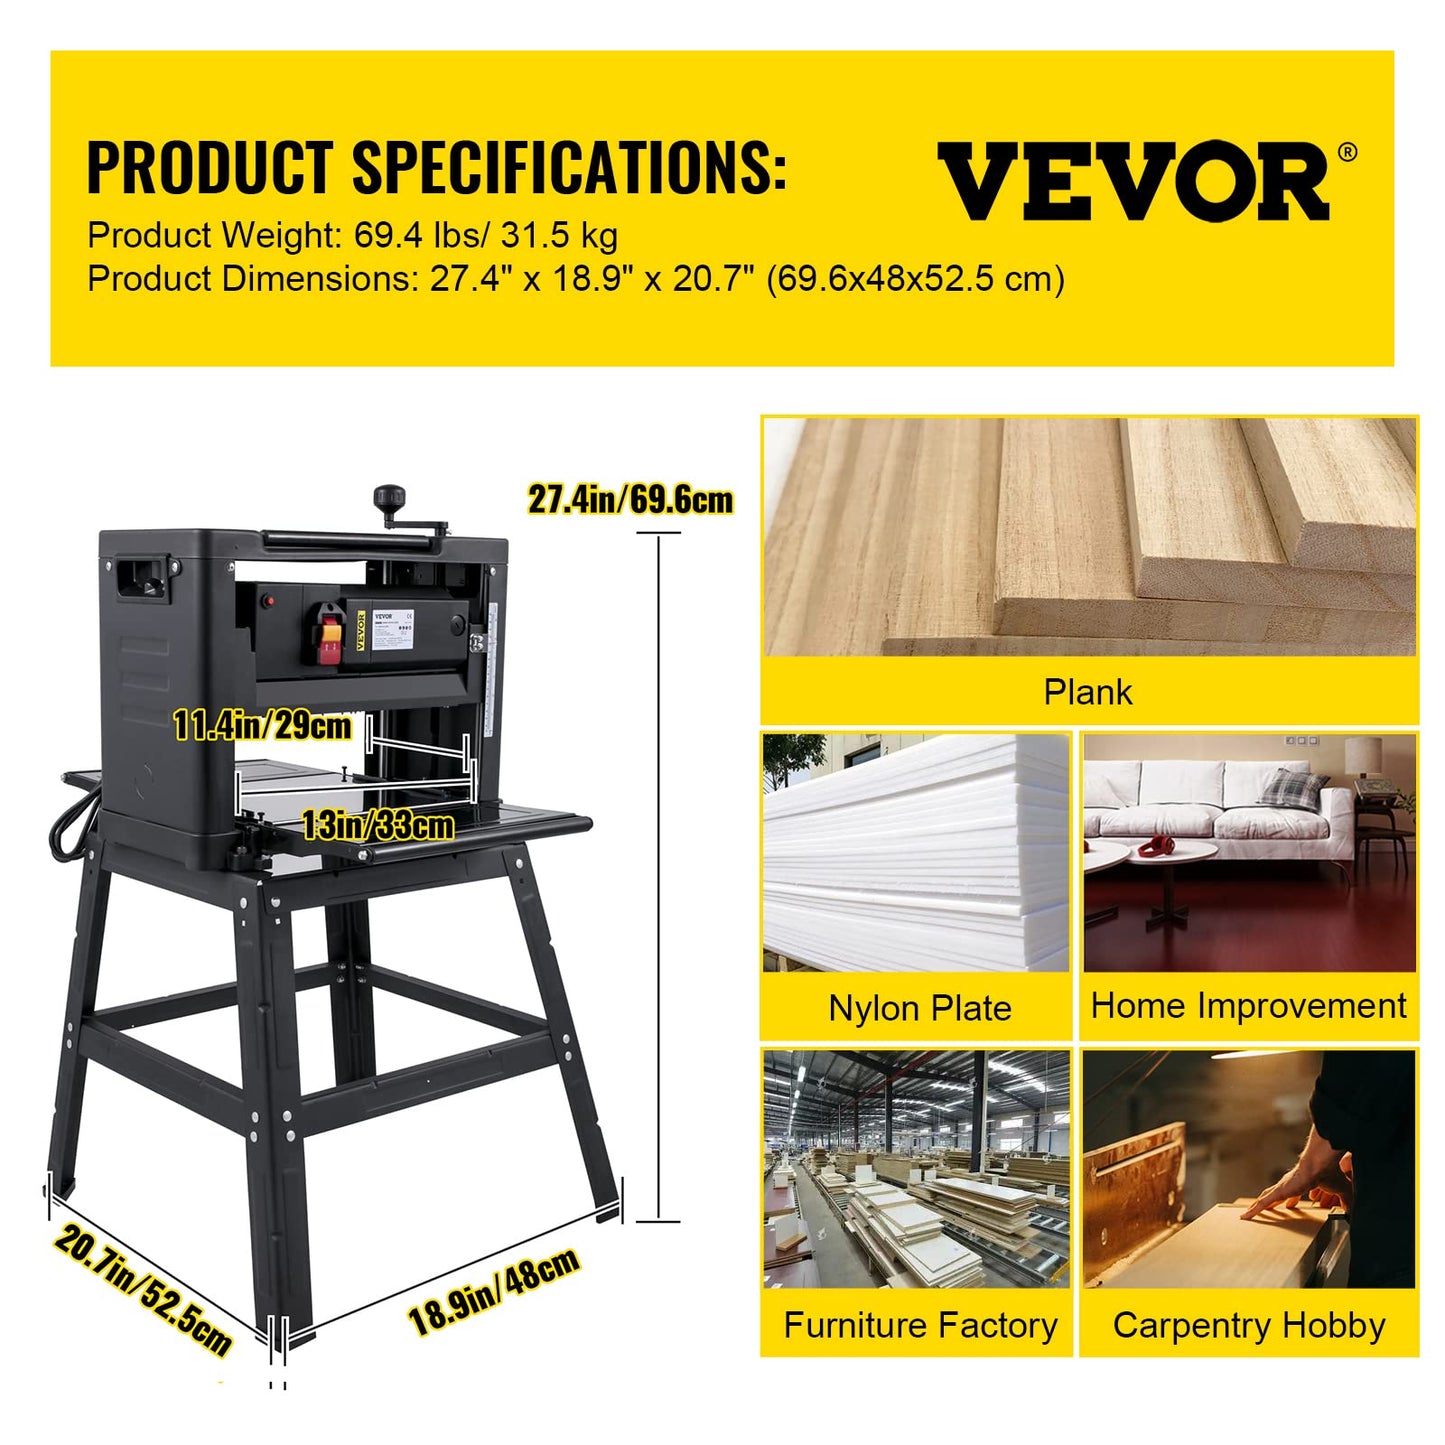 VEVOR Thickness Planer 13-Inch Benchtop Planer 2000W Wood Planer 8000 rpm Woodworking Planer 15 AMP Wood Planer Foldable 6m/min Planing Speed with